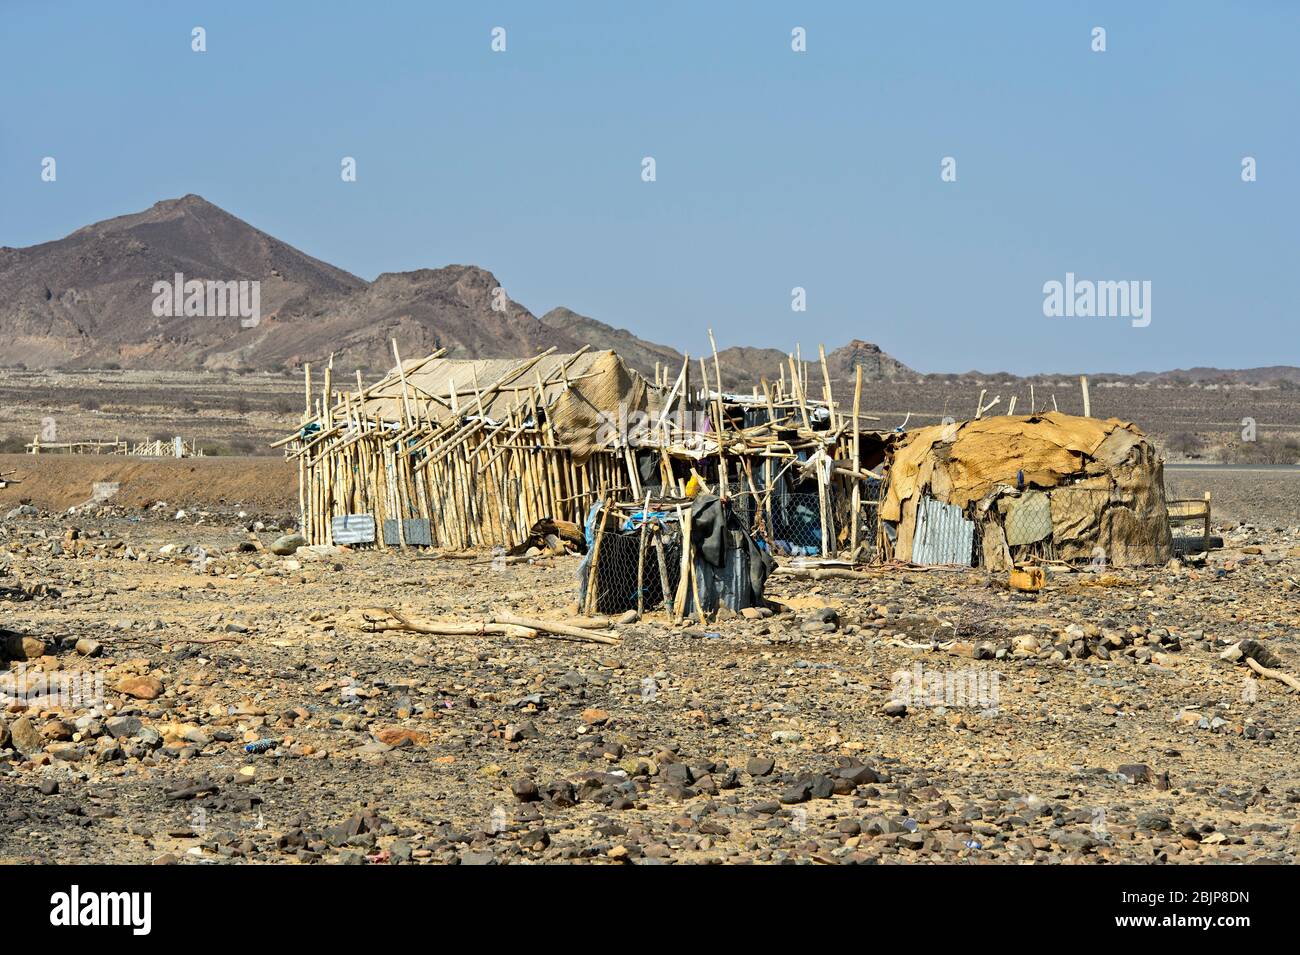 Traditional shelter of Afar nomads, Danakil Valley, Afar Province, Ethiopia Stock Photo